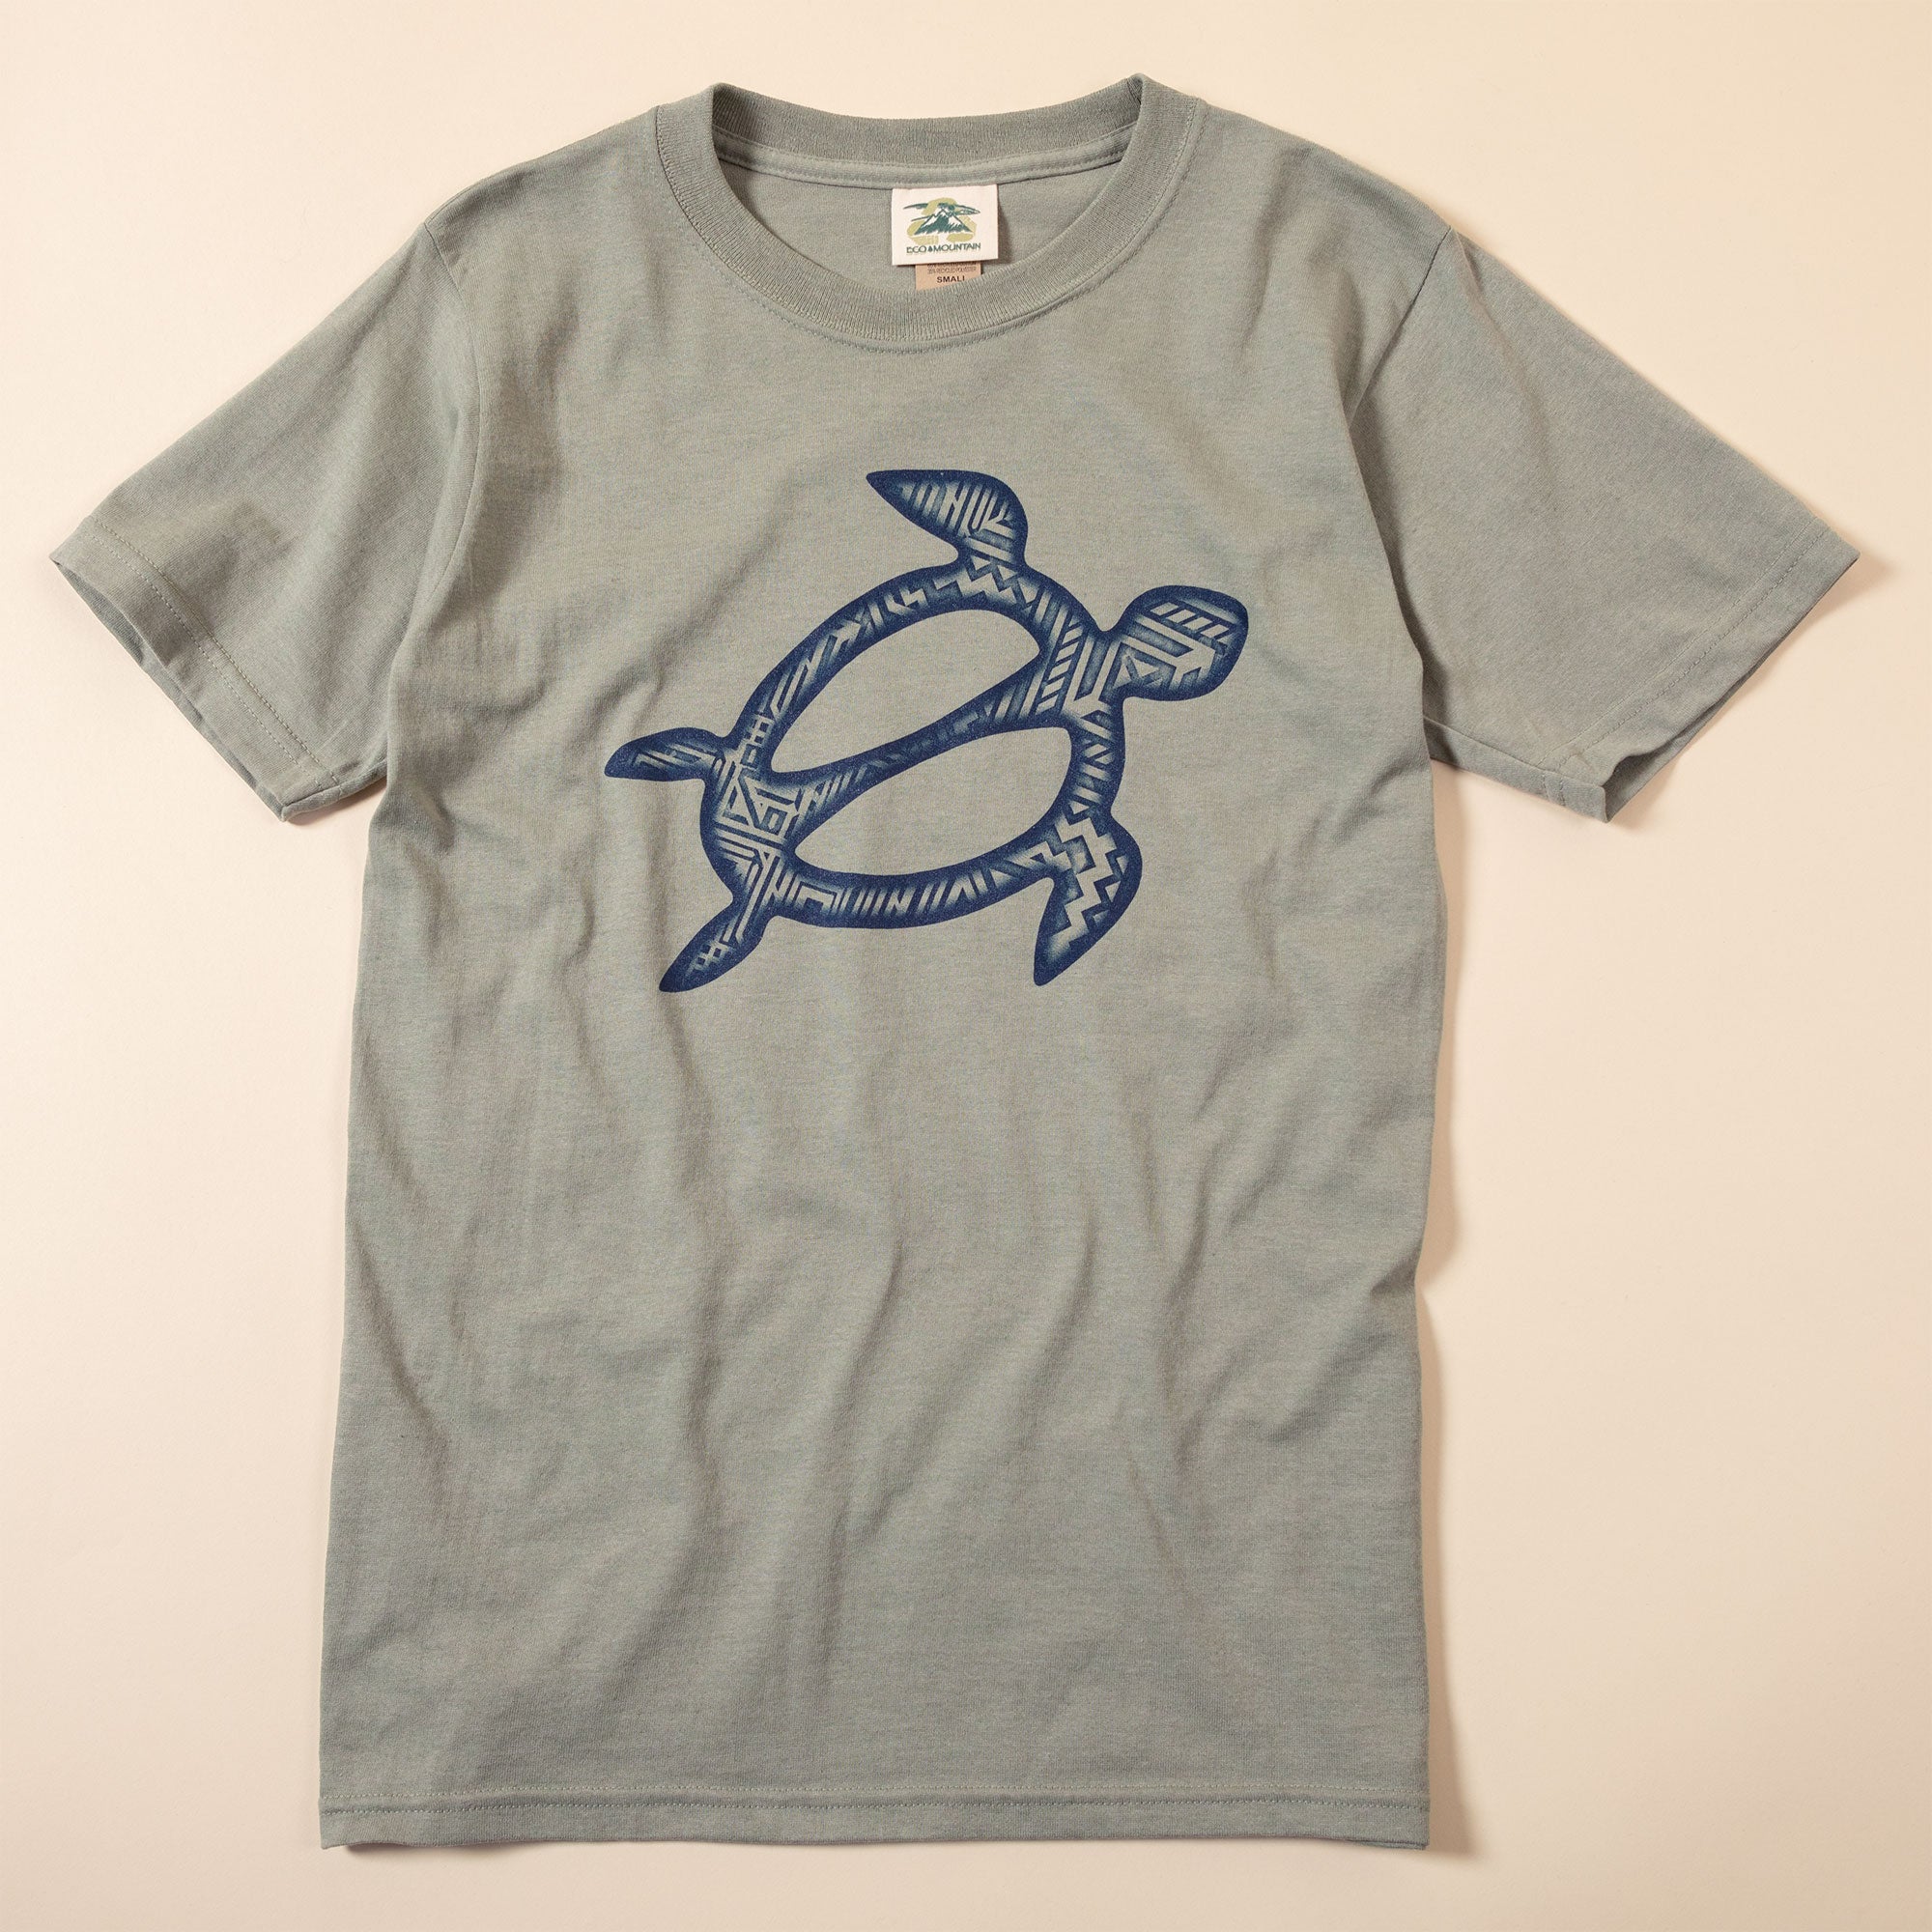 Sea Turtle Recycled Cotton T-Shirt - M